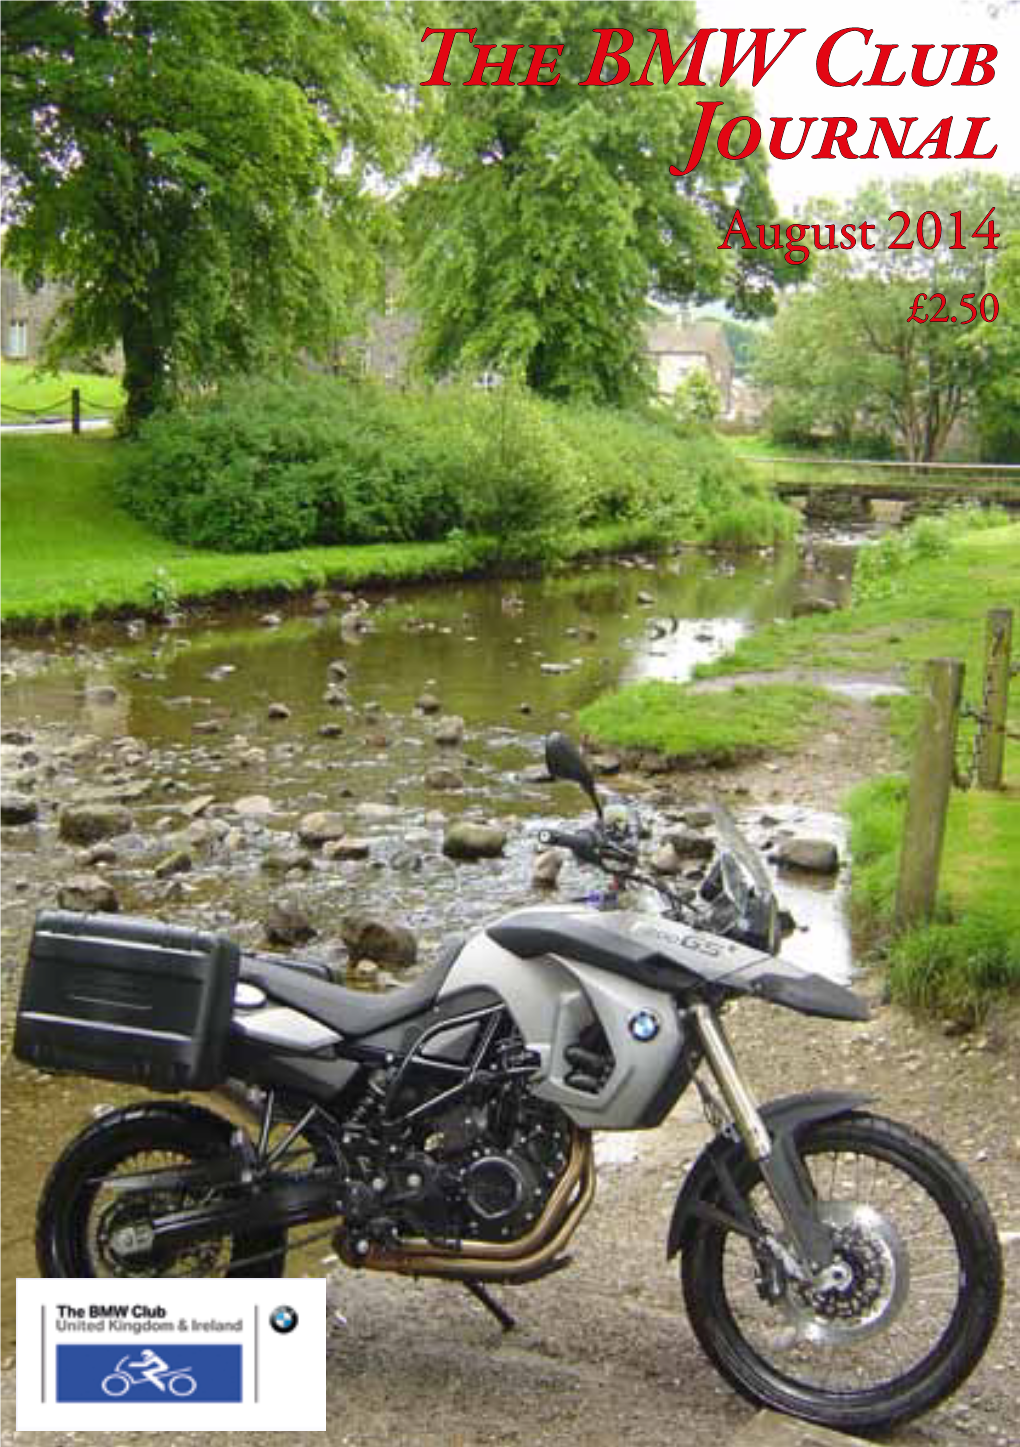 The BMW Club Journal August 2014 £2.50